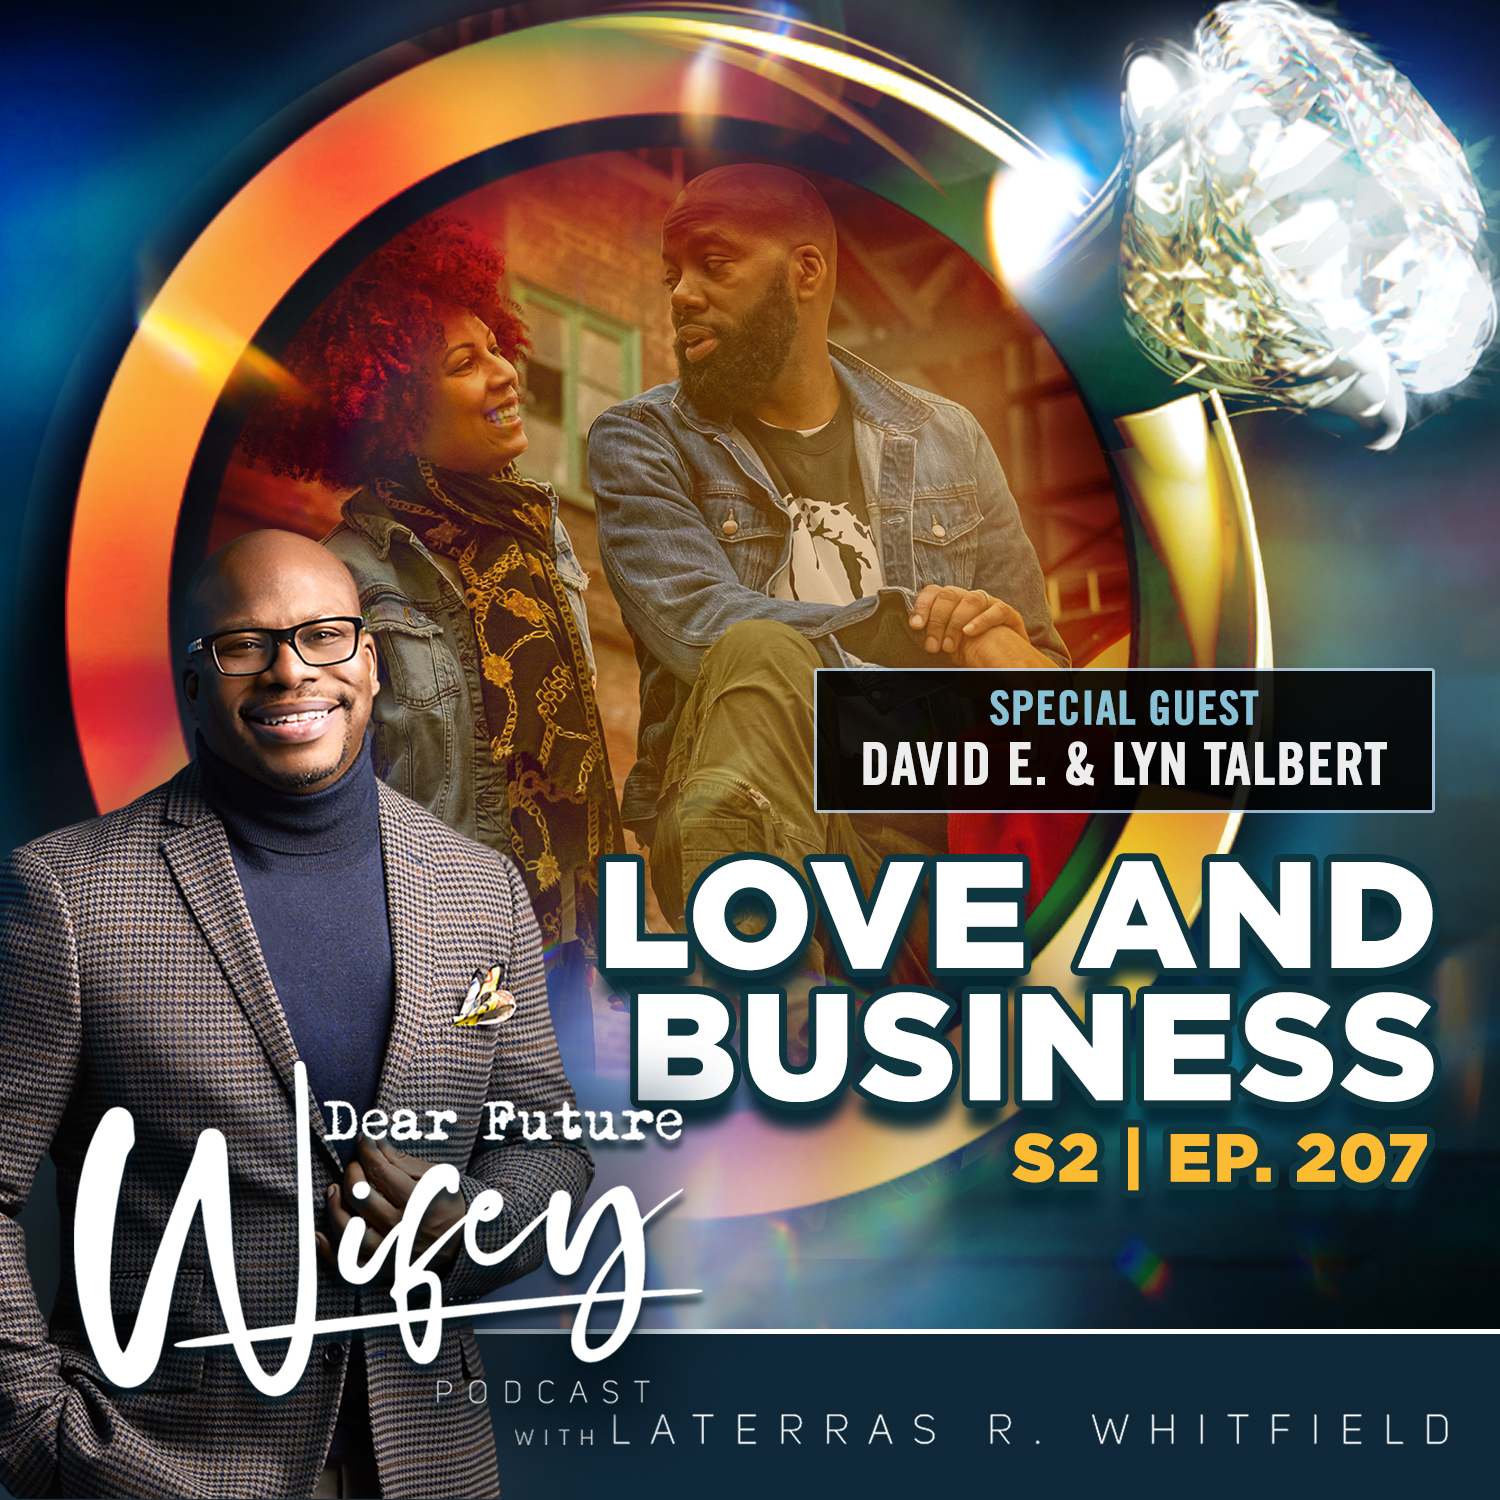 Love and Business (Guests: David E. & Lyn Sisson-Talbert)